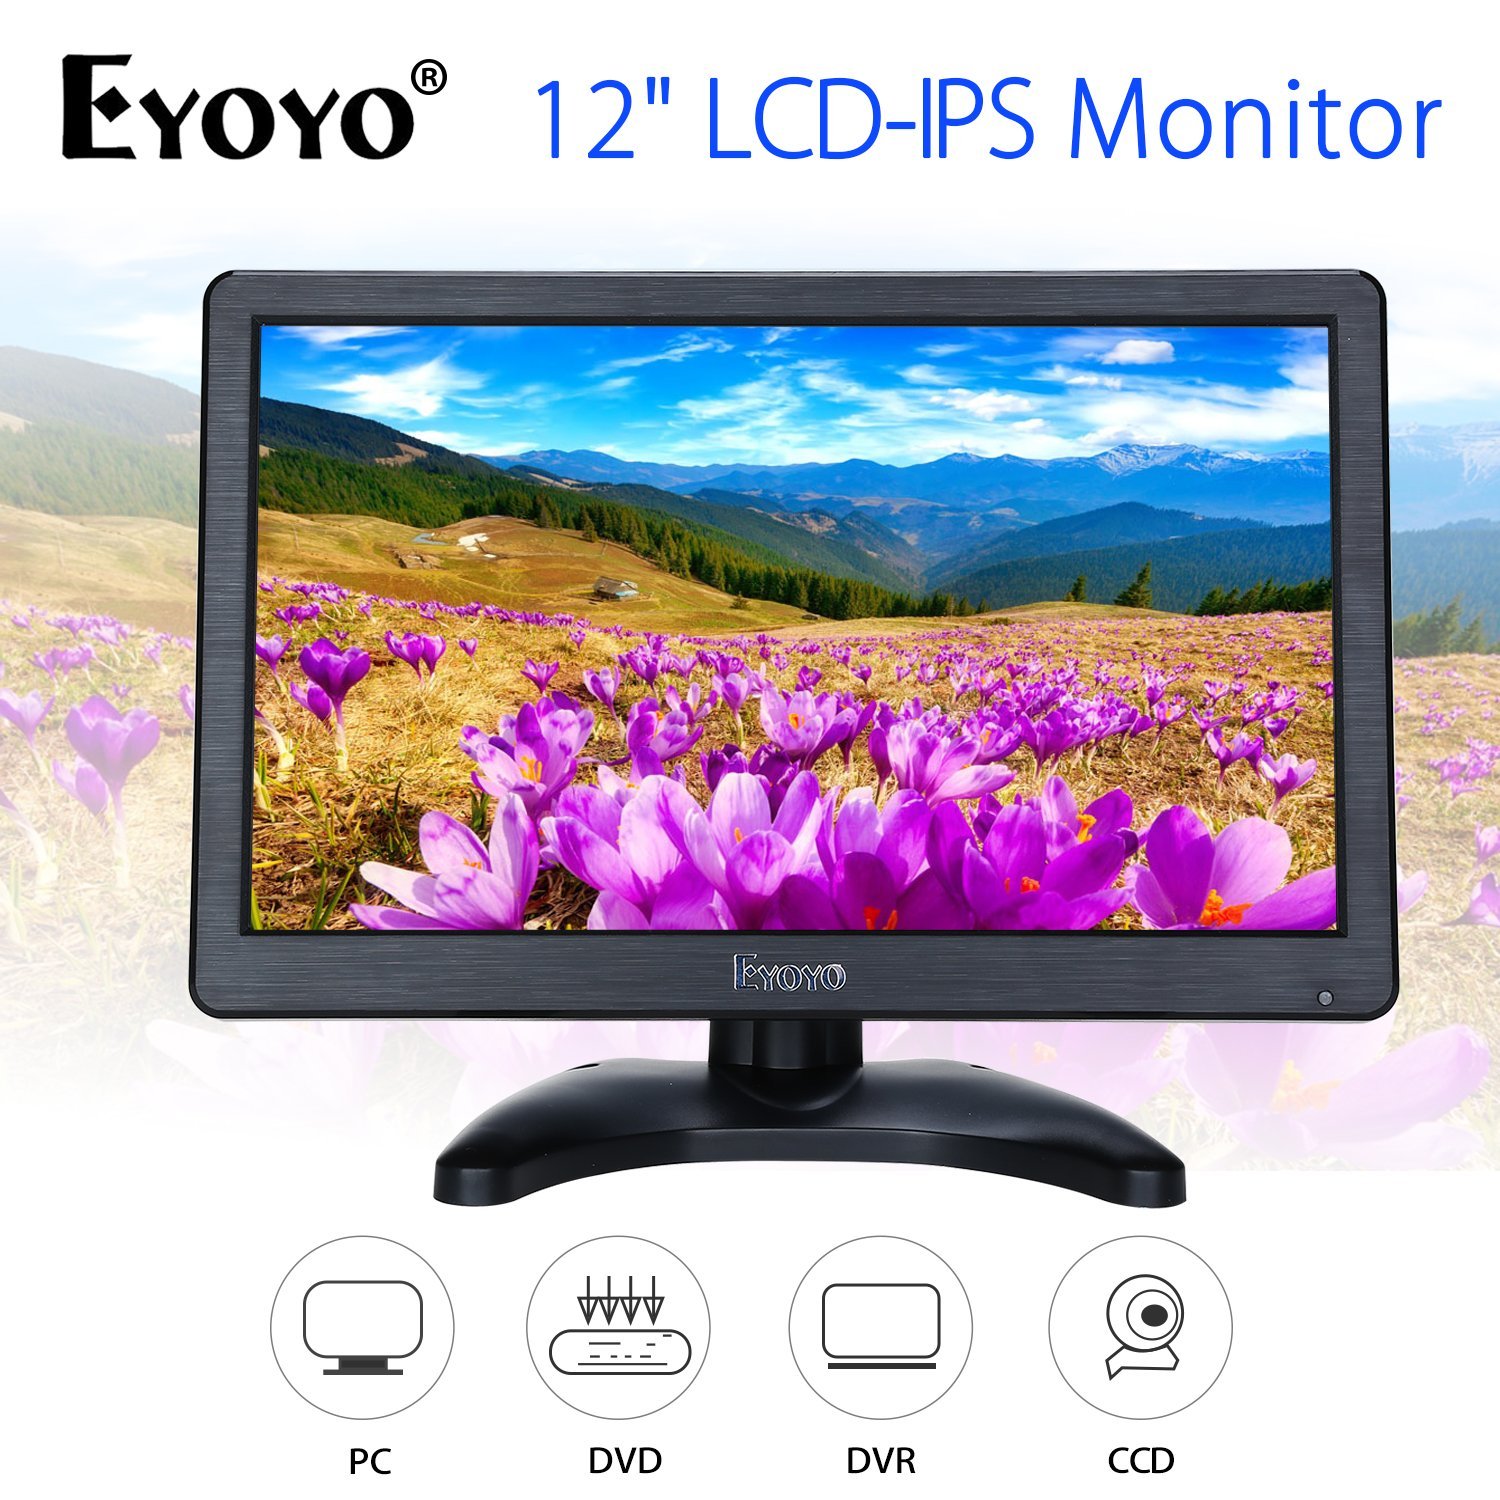 Eyoyo 12 inch HD 1920x1080 IPS LCD HDMI Monitor Screen Input Audio Video Display with BNC Cable for PC Computer Camera DVD Security CCTV DVR Home Office Surveillance